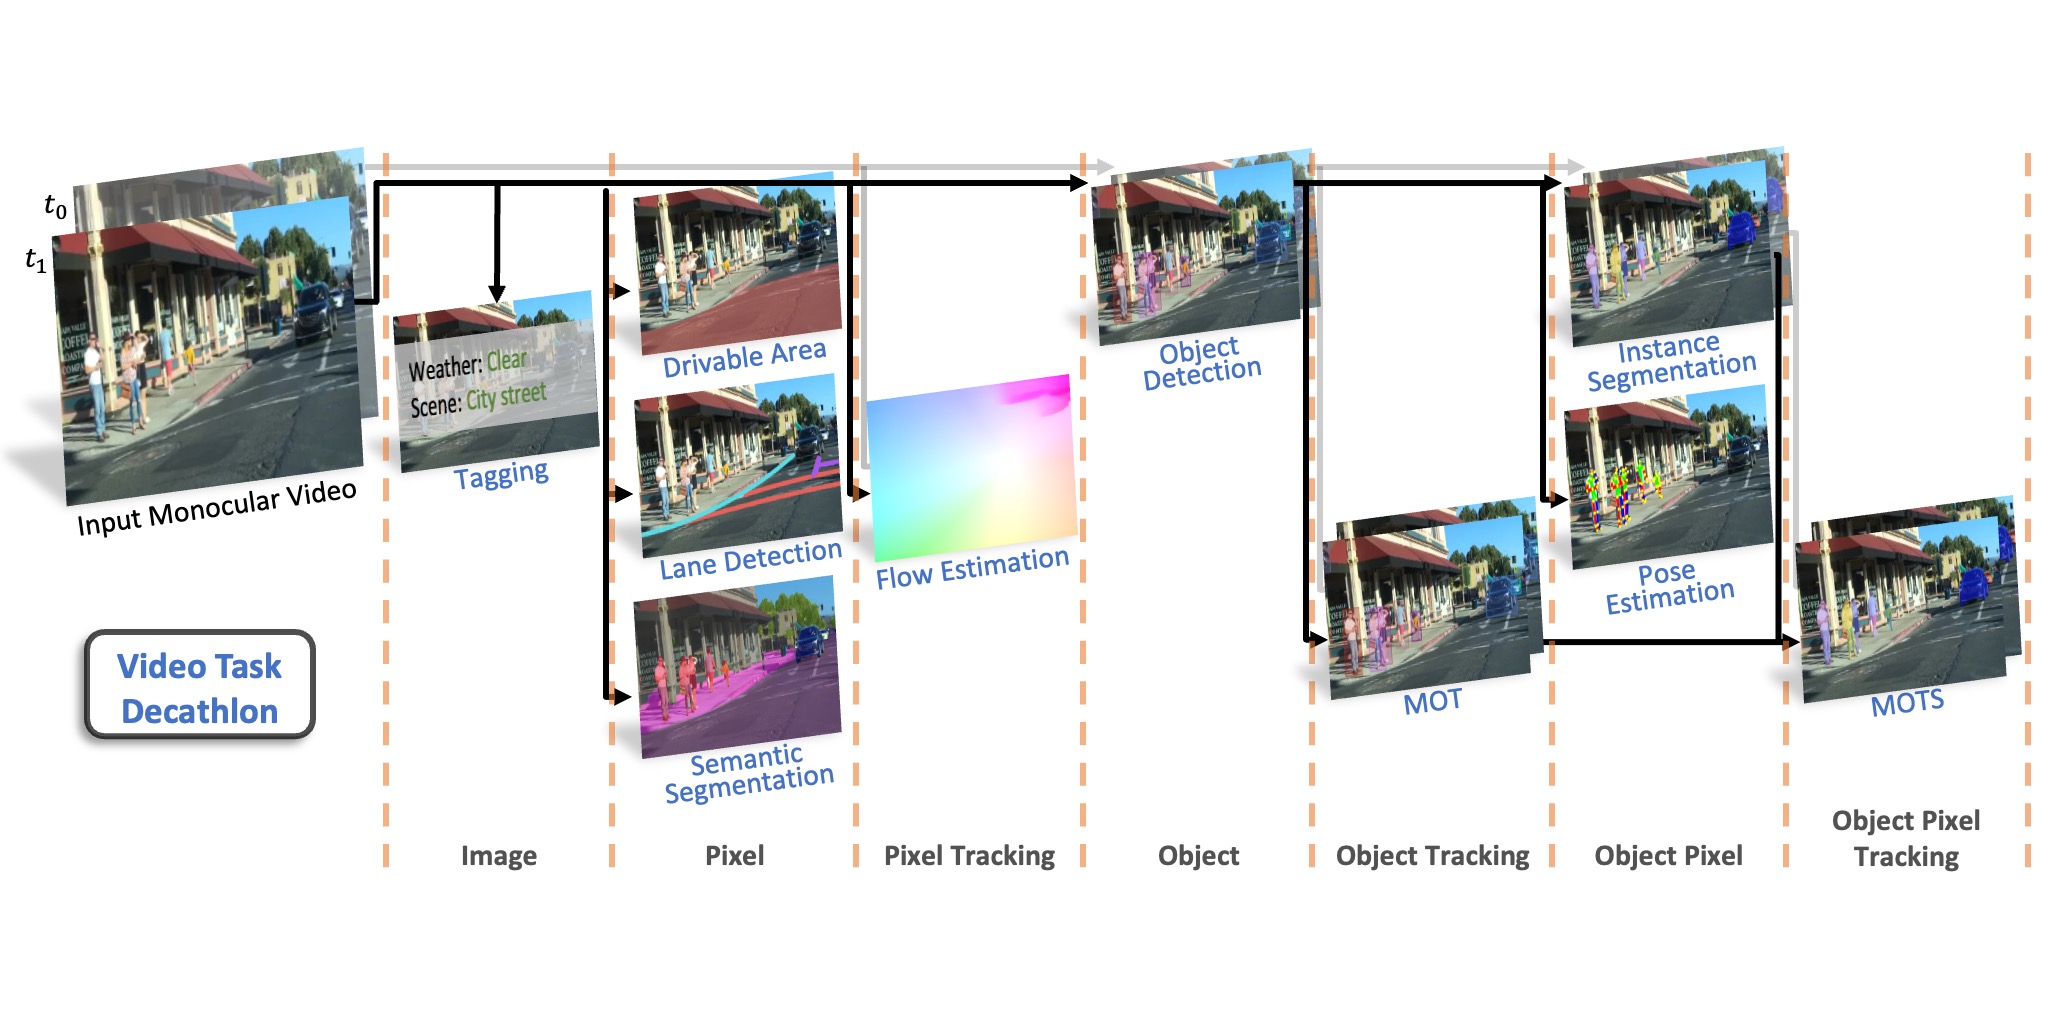 Video Task Decathlon: Unifying Image and Video Tasks in Autonomous Driving